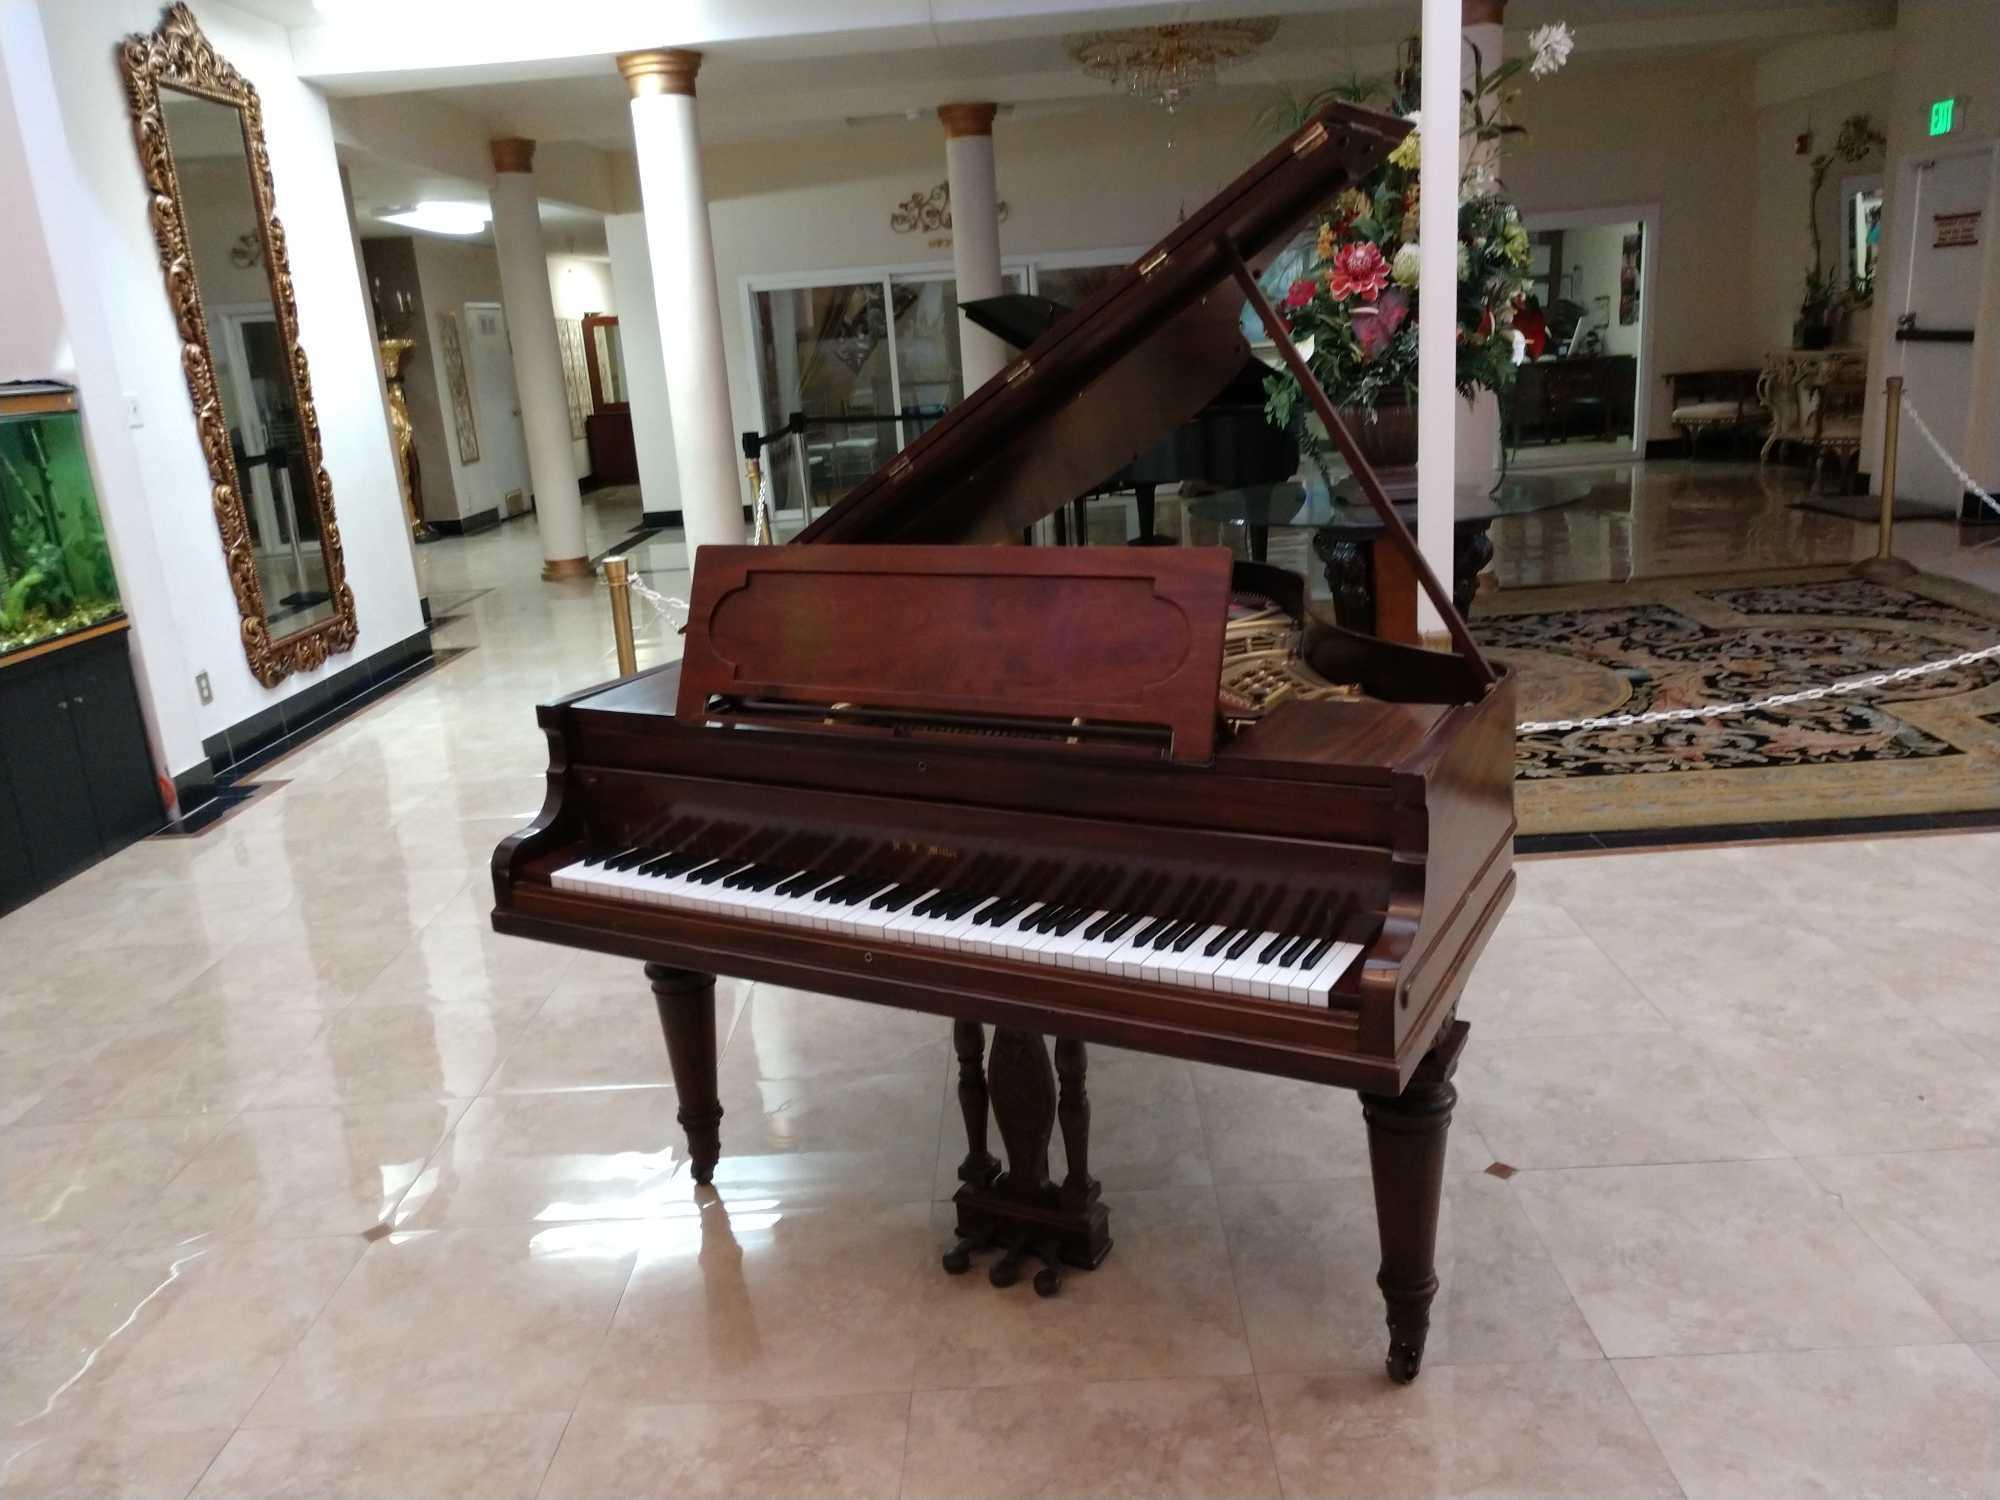 H. F. Miller baby grand piano